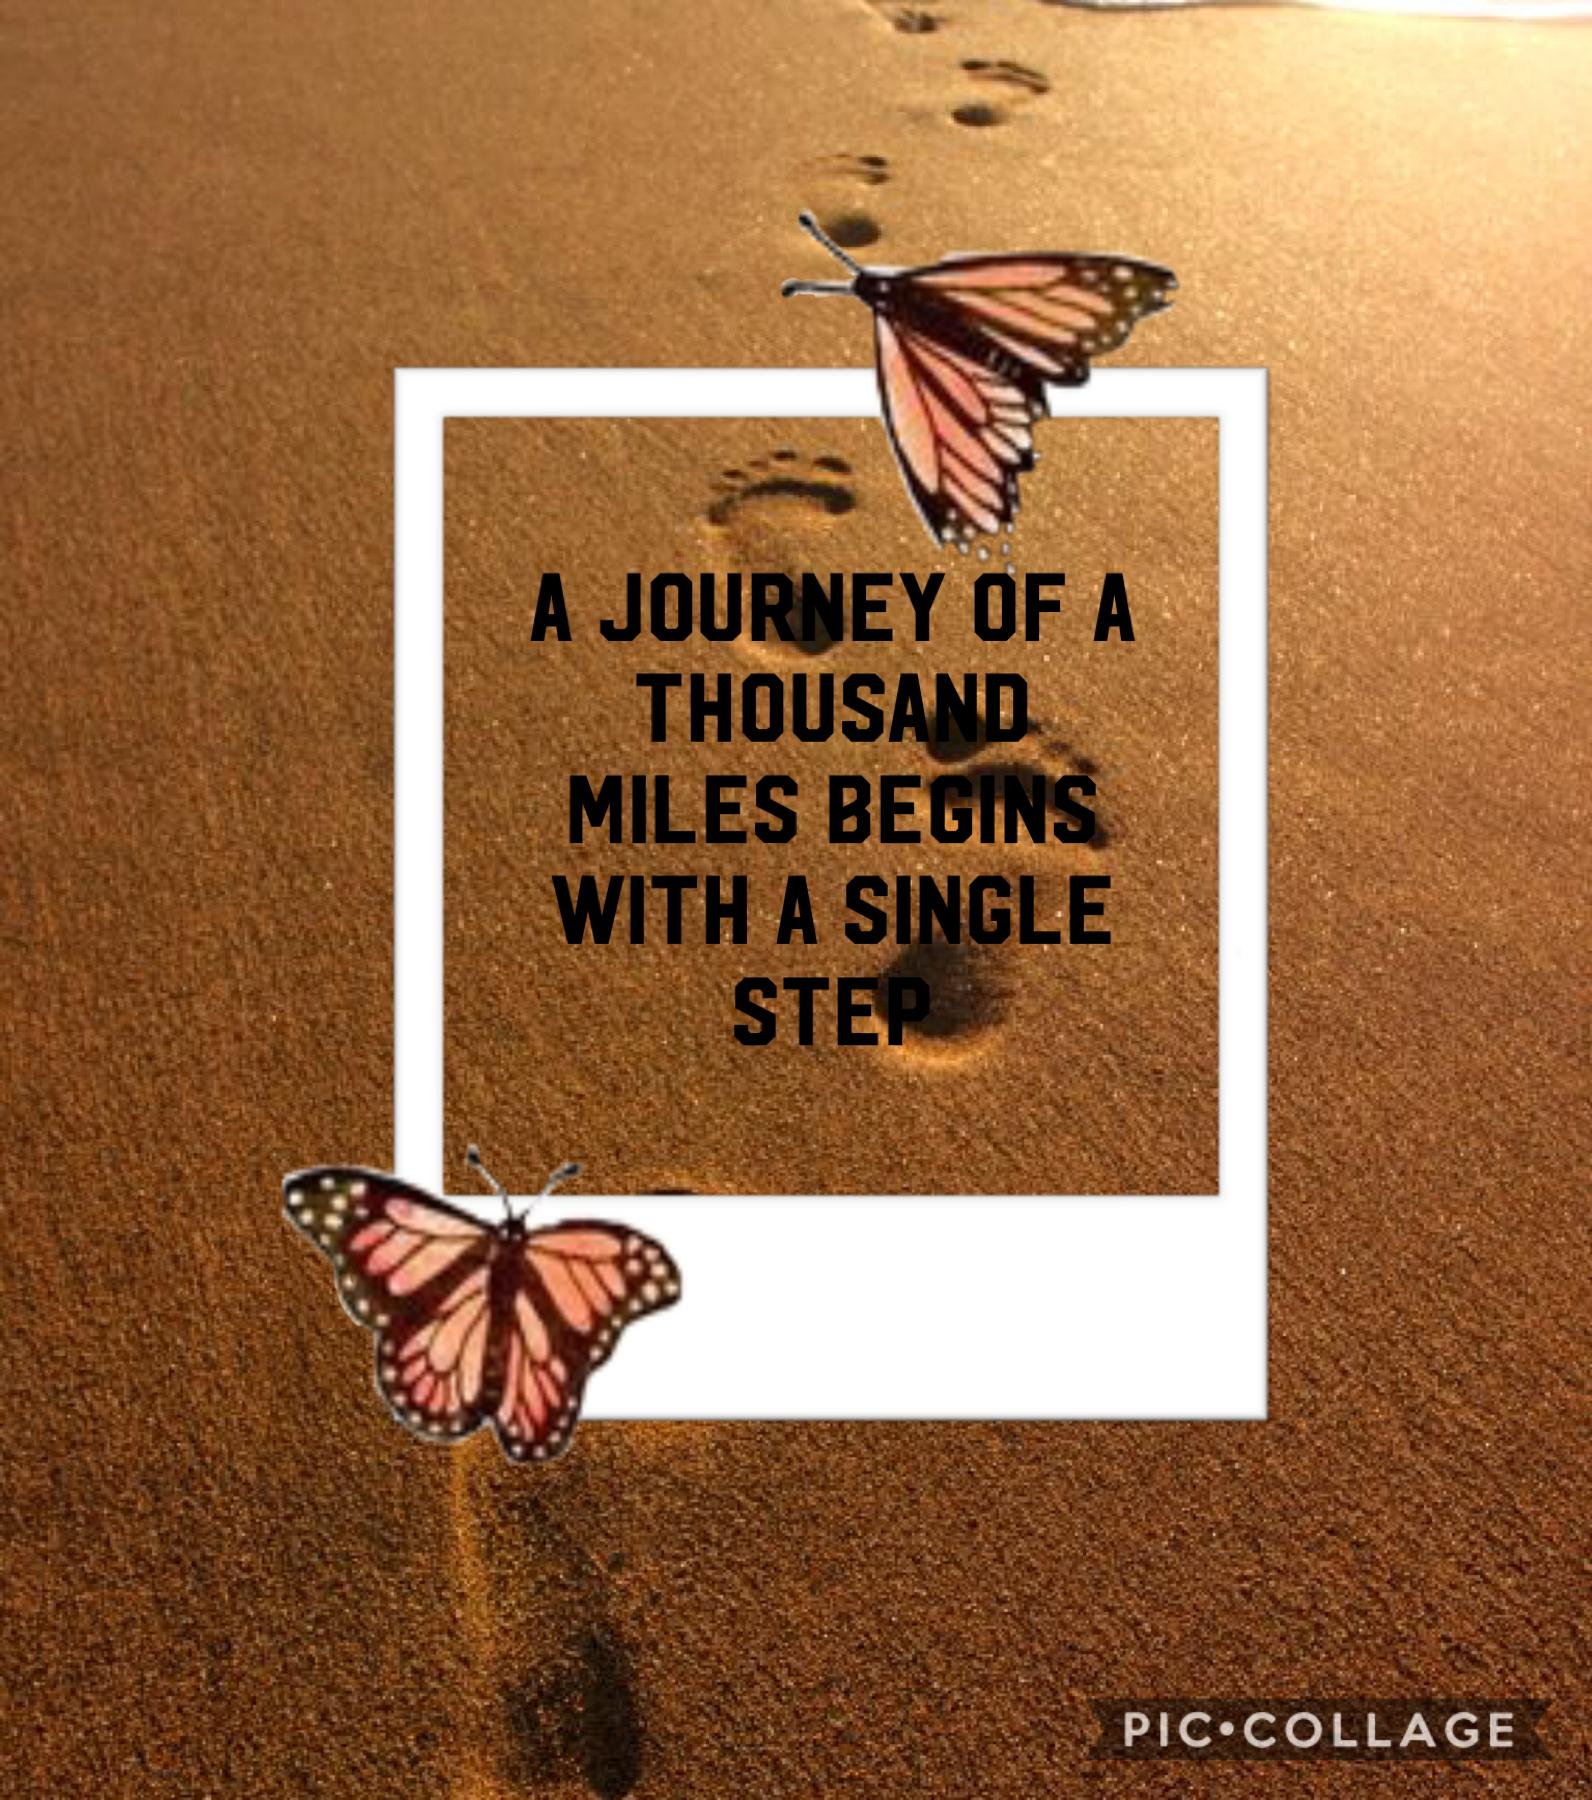 A journey of a thousand mile begins with a single step